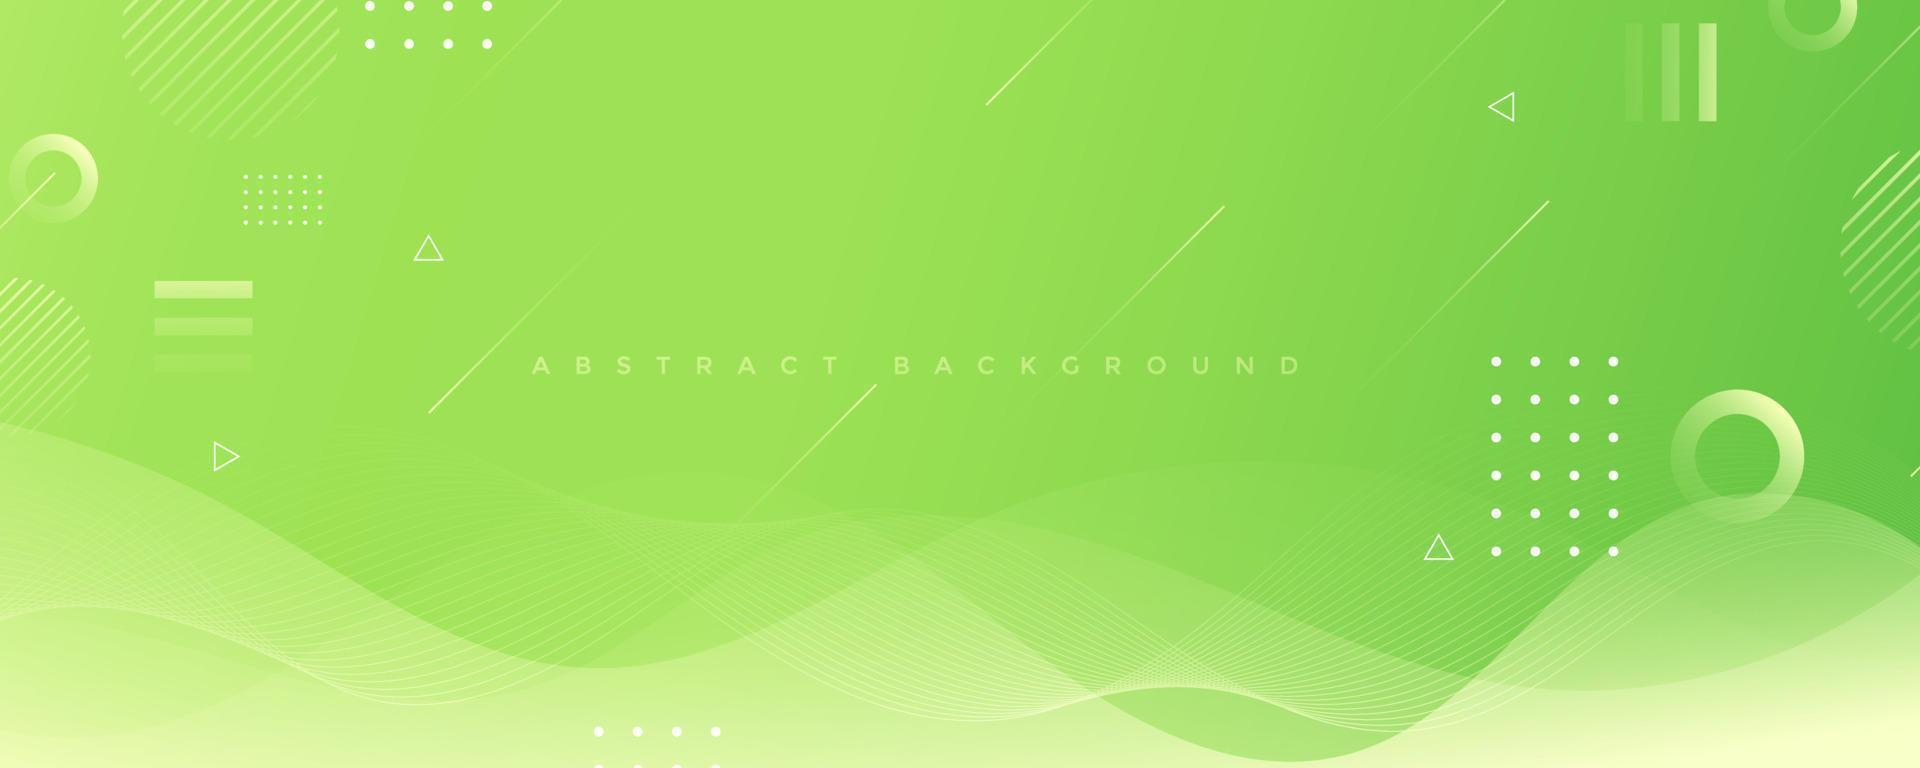 Banner background. colorful, bright green gradation with wave elements vector